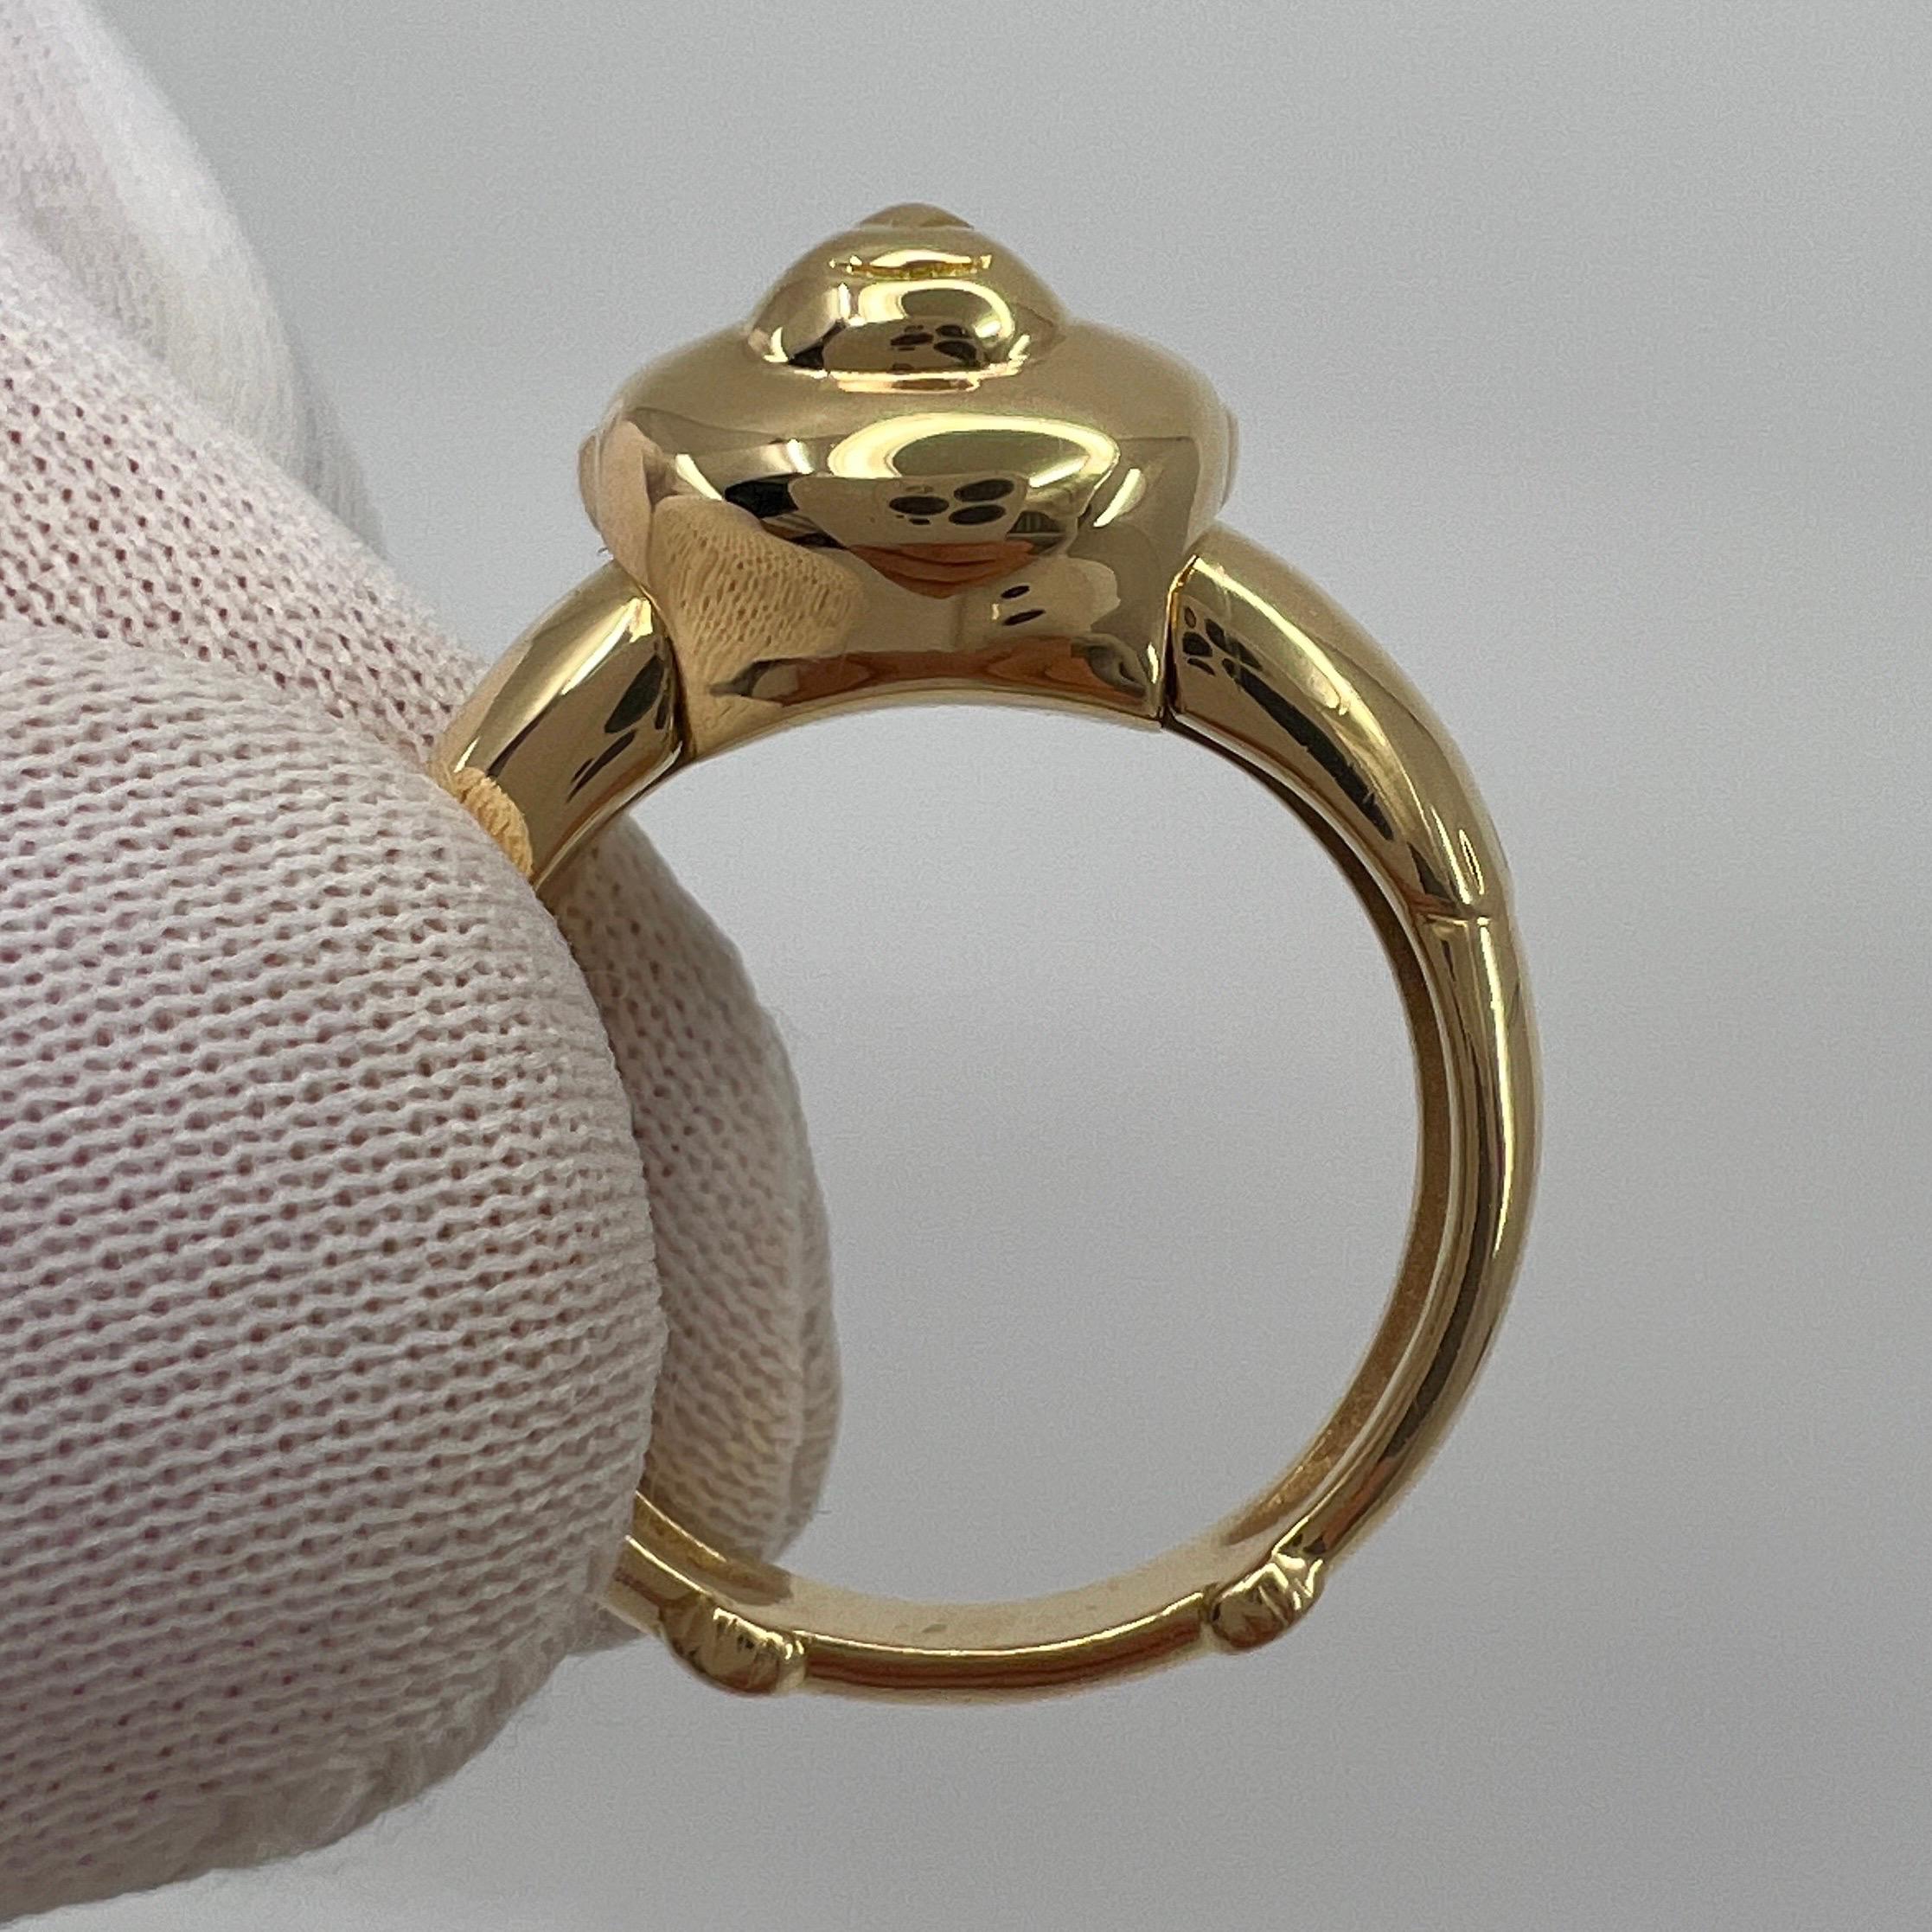 Very Rare Vintage Van Cleef & Arpels 18k Yellow Gold Teddy Bear Ring and Pendant 2